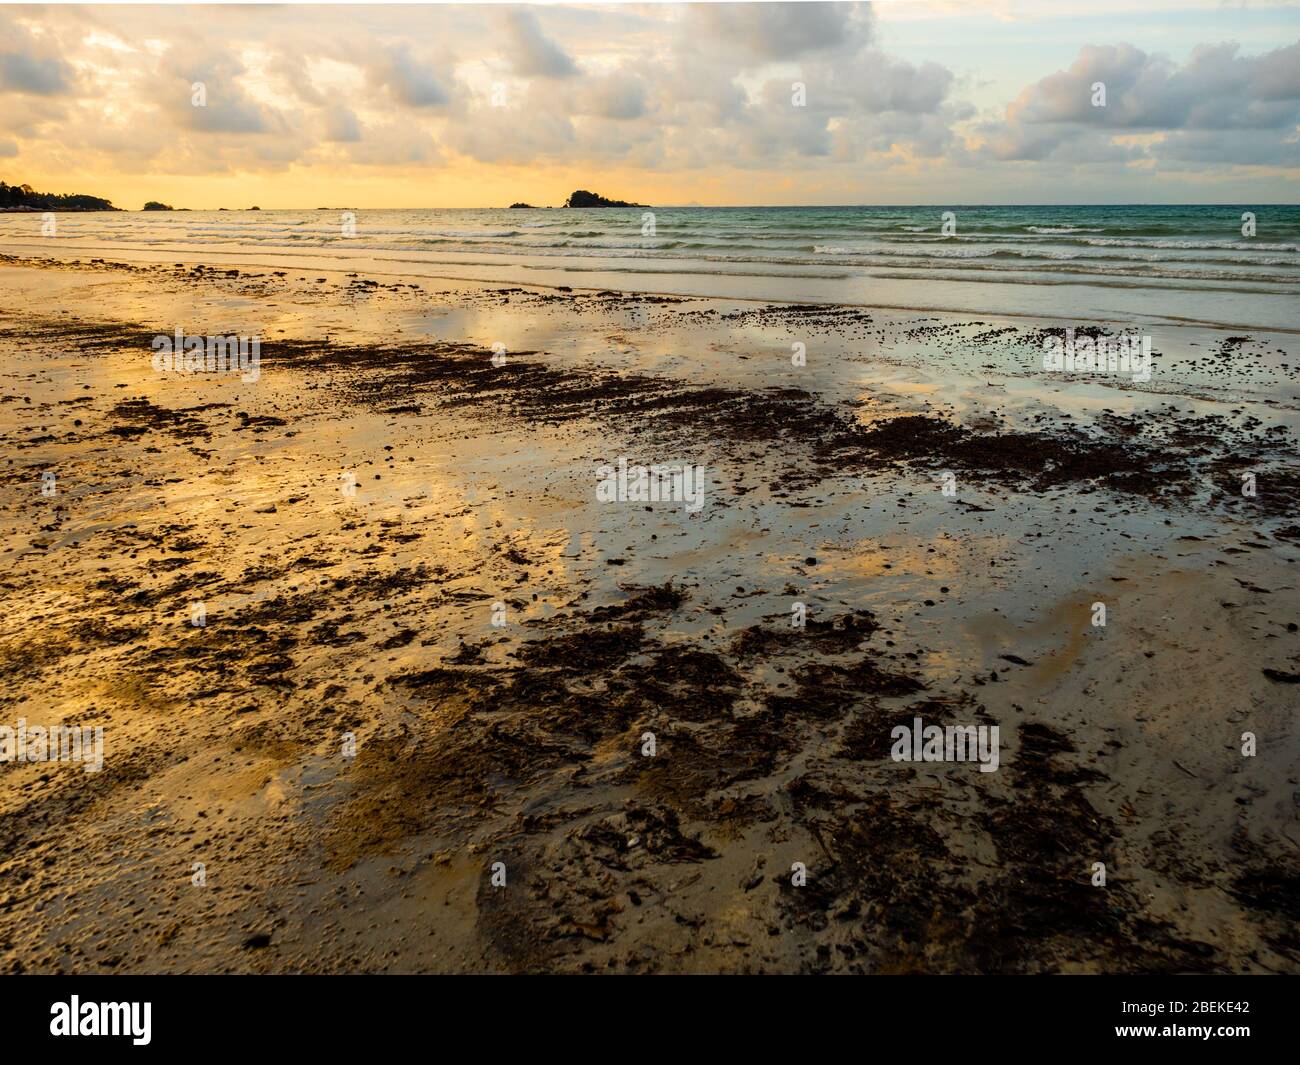 BINTAN, INDONESIA – 7 MAR 2020 – Tar balls and oil sludge from marine oil spills wash up on Lagoi beach during a beautiful sunset causing pollution Stock Photo